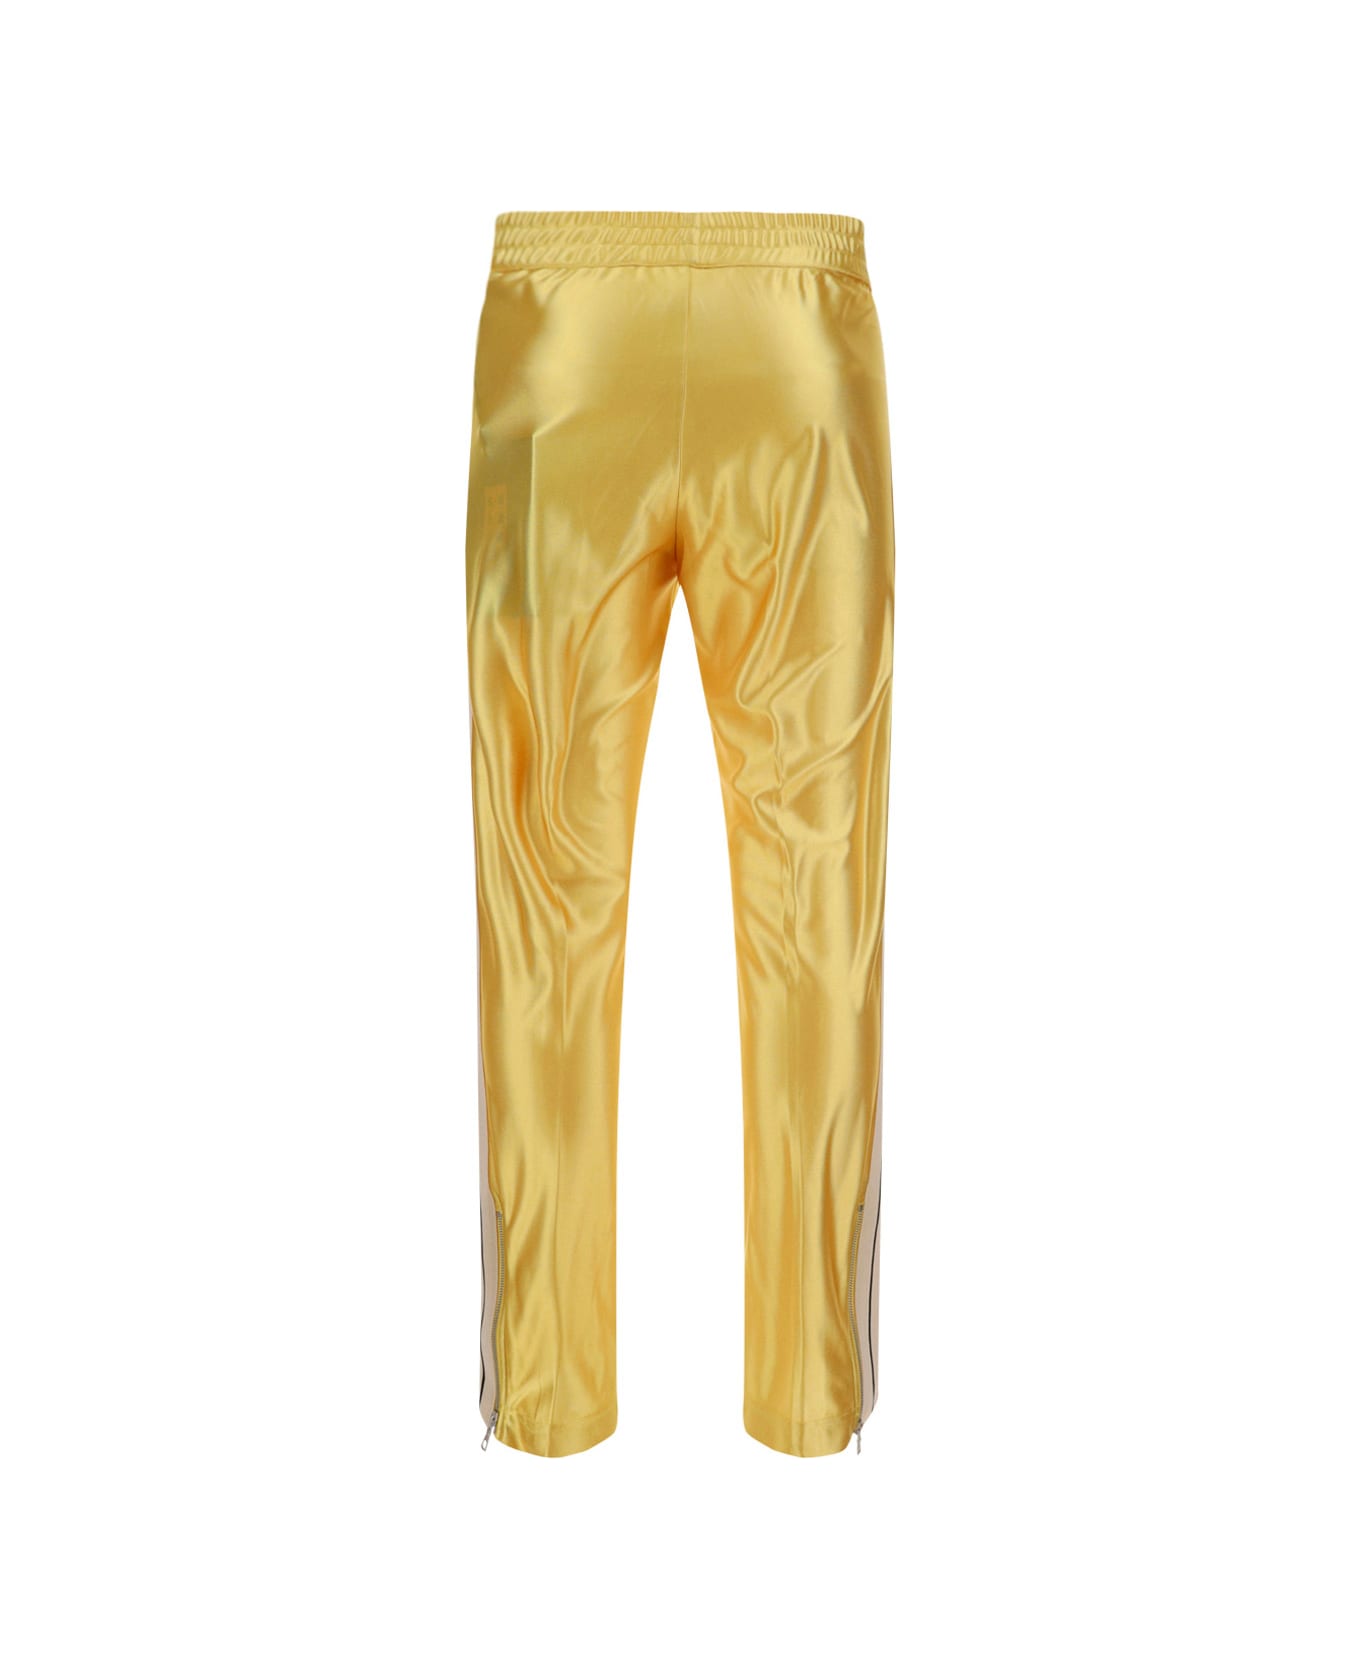 Moncler X Palm Angels Palm Angels X Moncler Track Pants - YELLOW